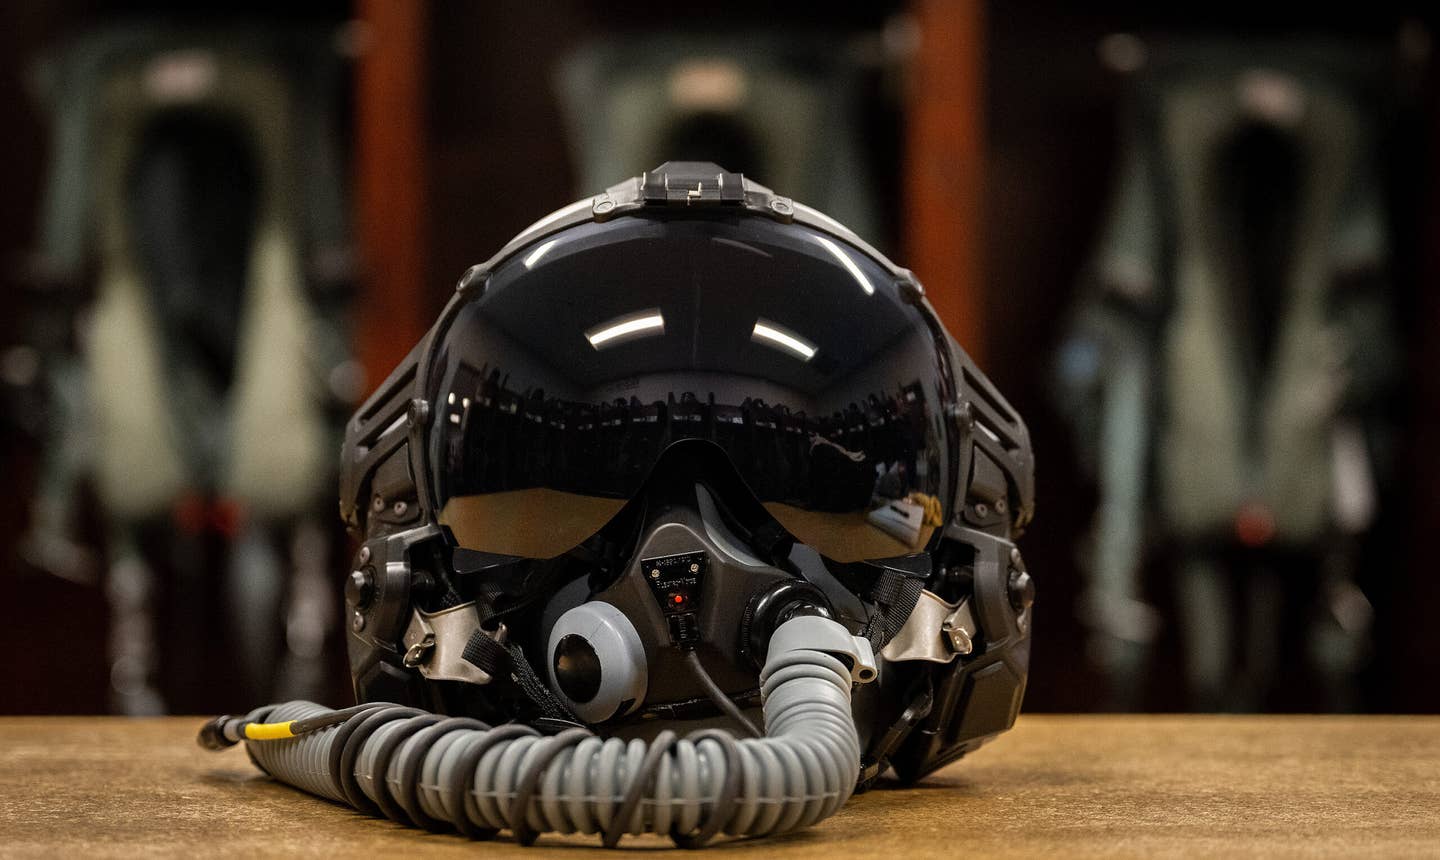 The Air Force’s Next Generation Fixed Wing Helmet sits ready for another testing at Eglin Air Force Base, Fla. <em>Credit: U.S. Air Force photo/Samuel King Jr.</em>